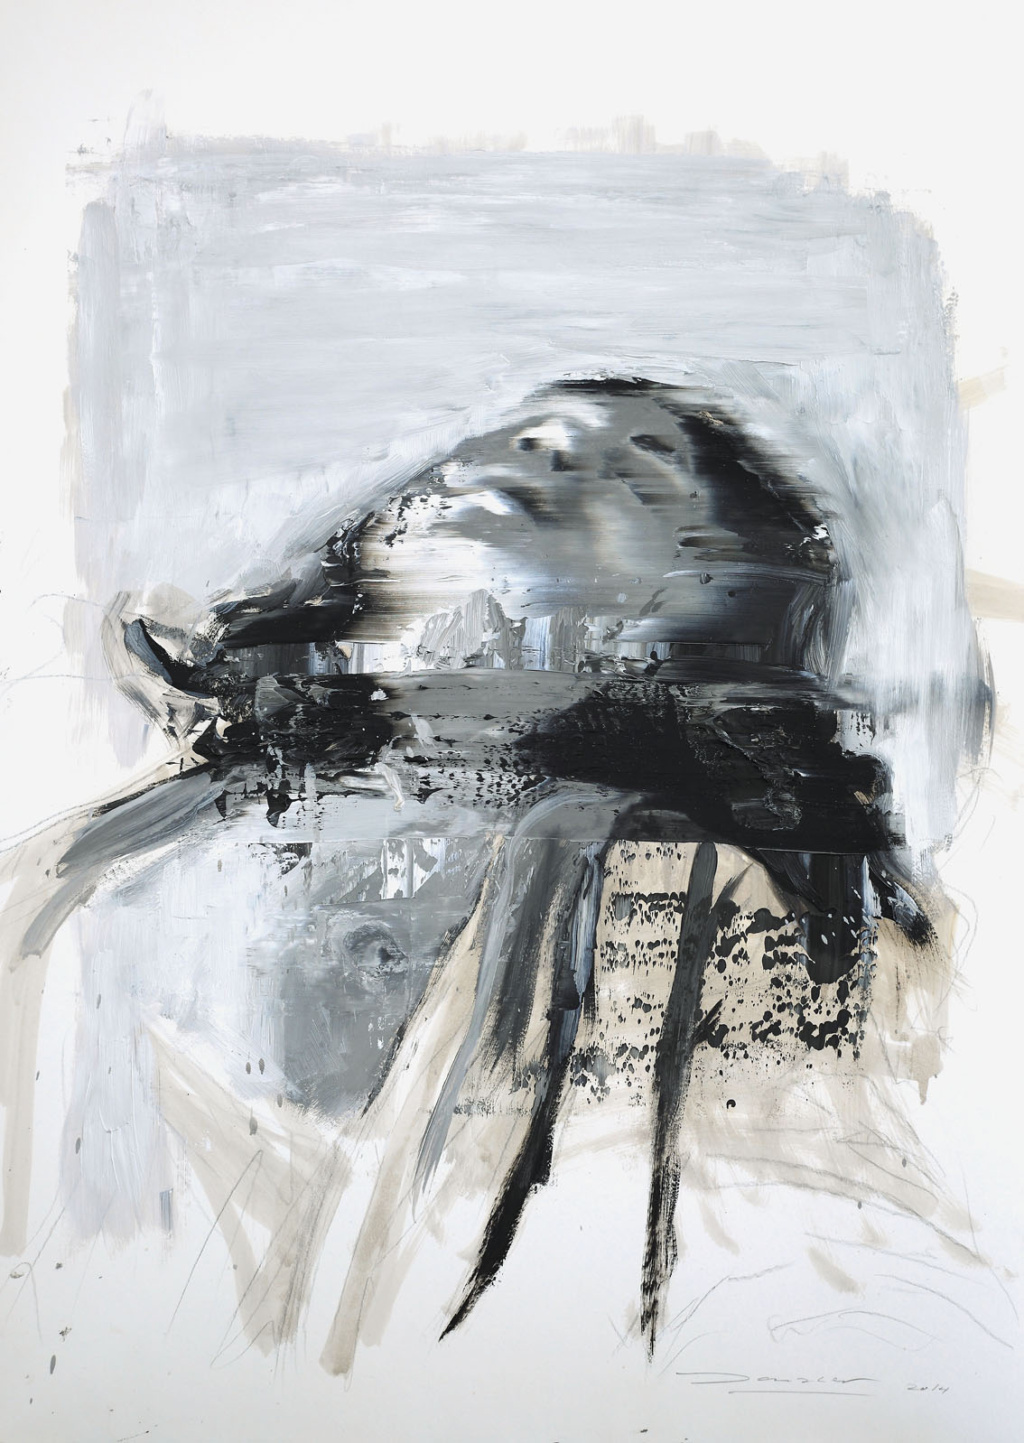 Andy Denzler, 2226, Study for East II, 2014, 
Oil on paper, 70 x 50 cm